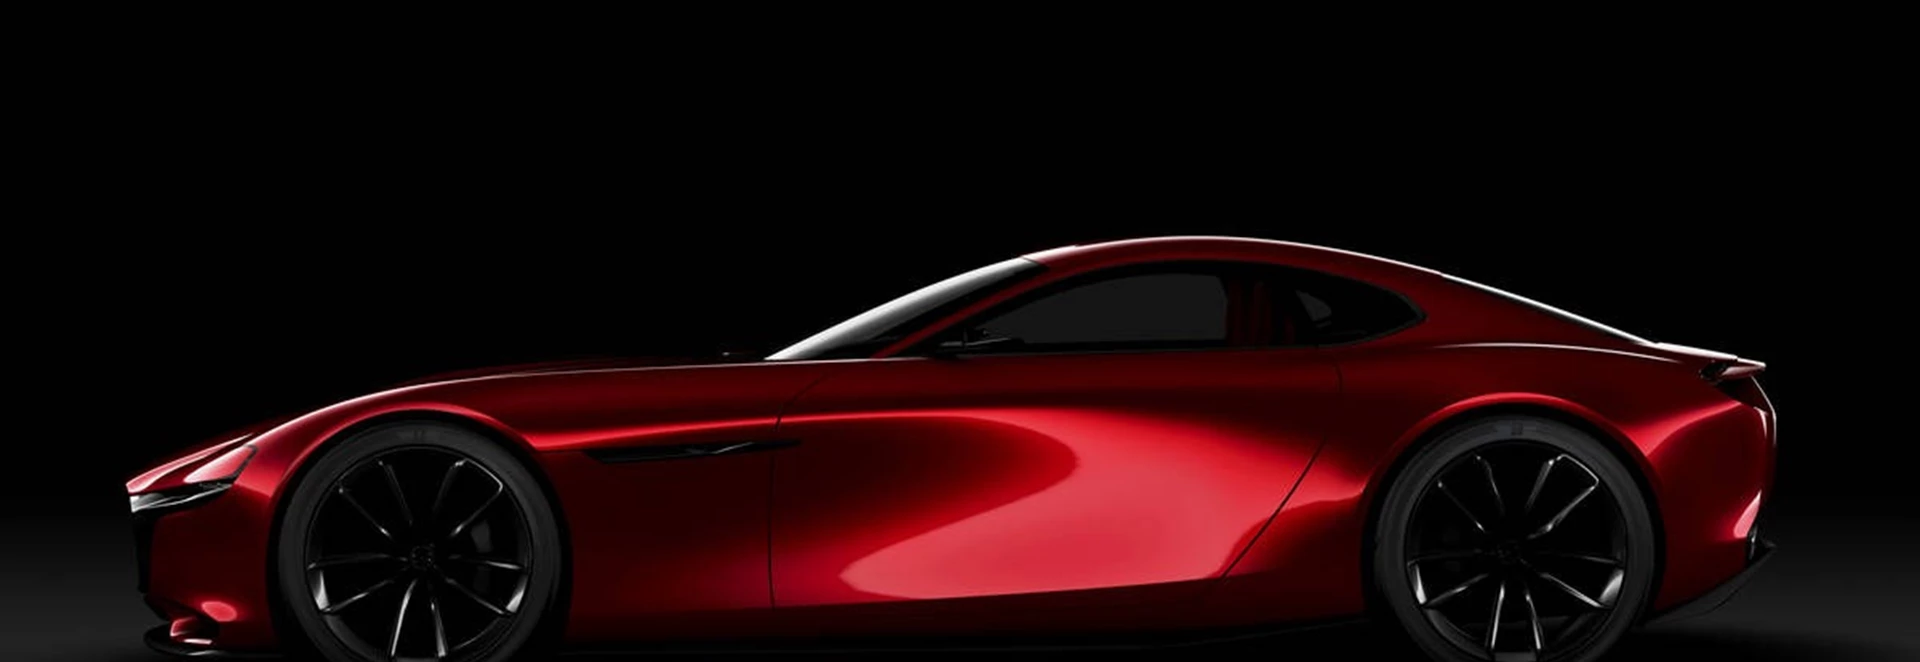 Mazda reportedly working on a small hybrid powered by a rotary engine